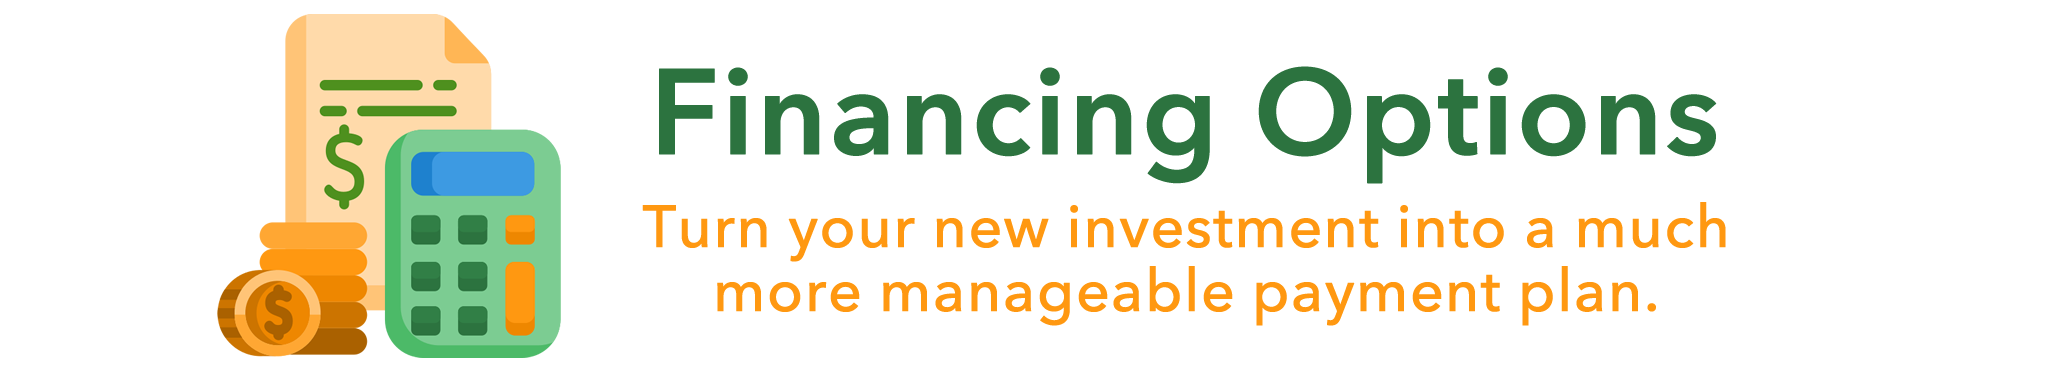 Financing Options - Turn your new investment into a more manageable payment plan. (to approved credit, see page for further details)